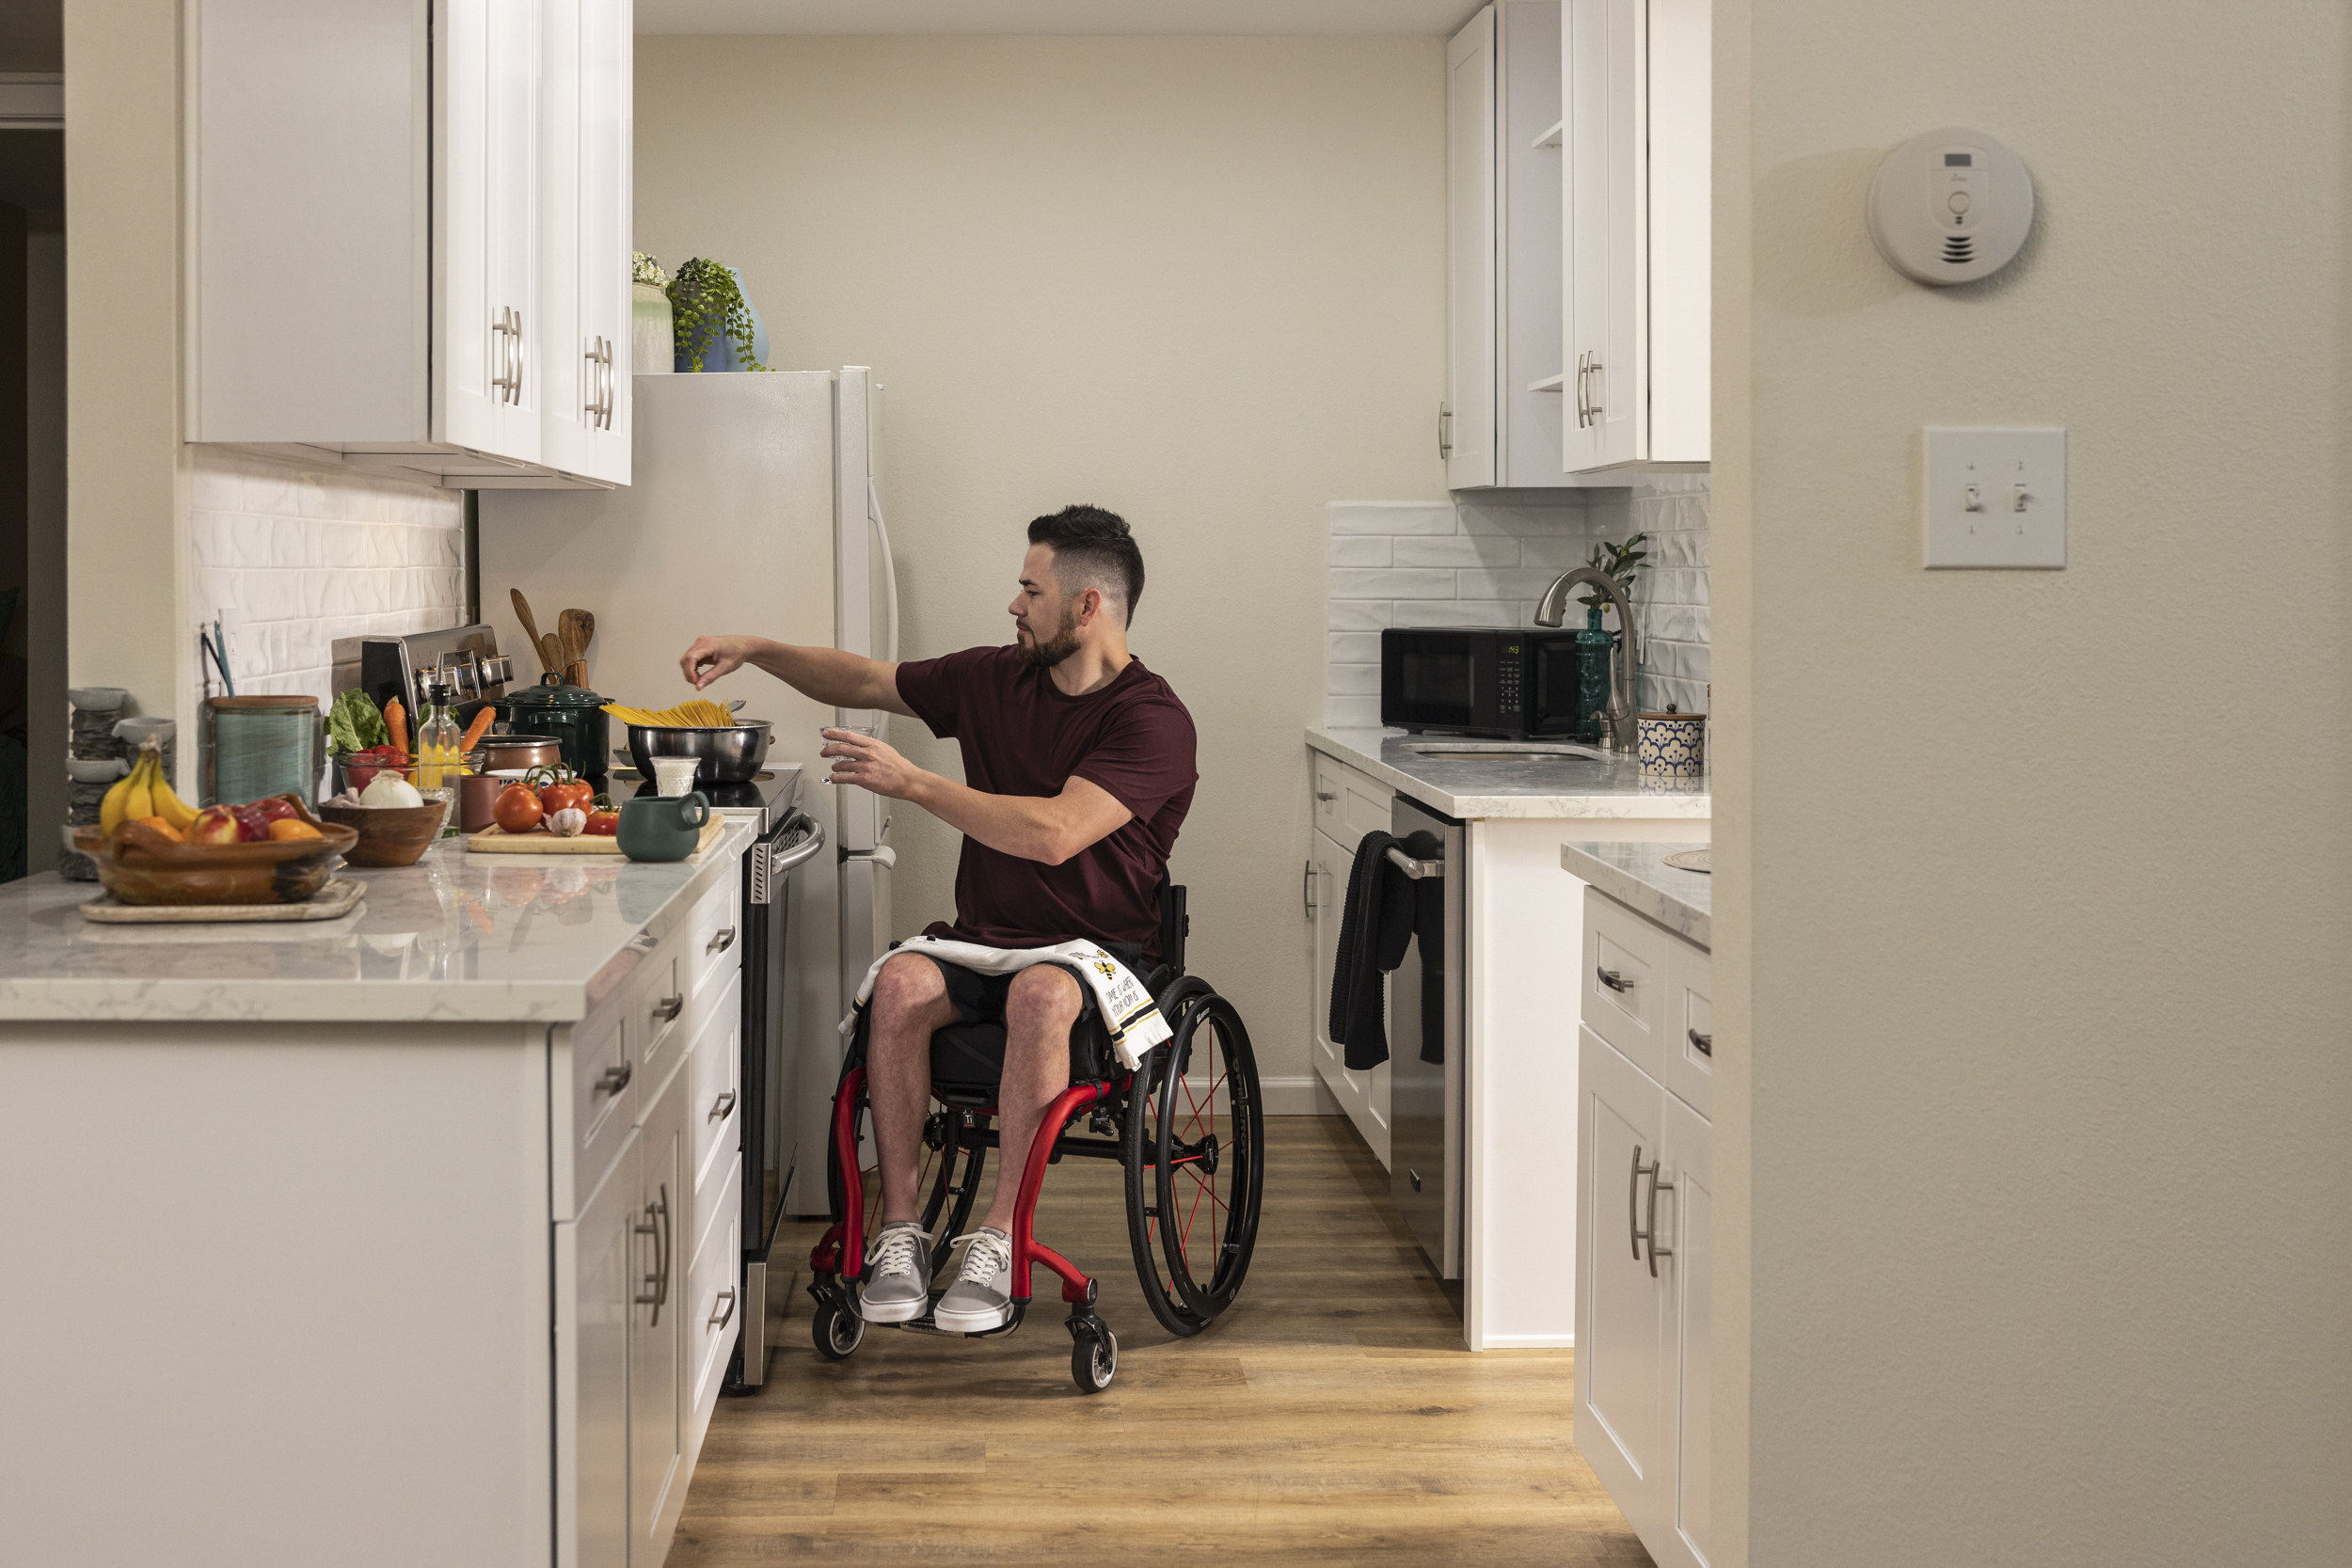 Fire Safety - A person who uses a wheelchair cooking safely in their kitchen.